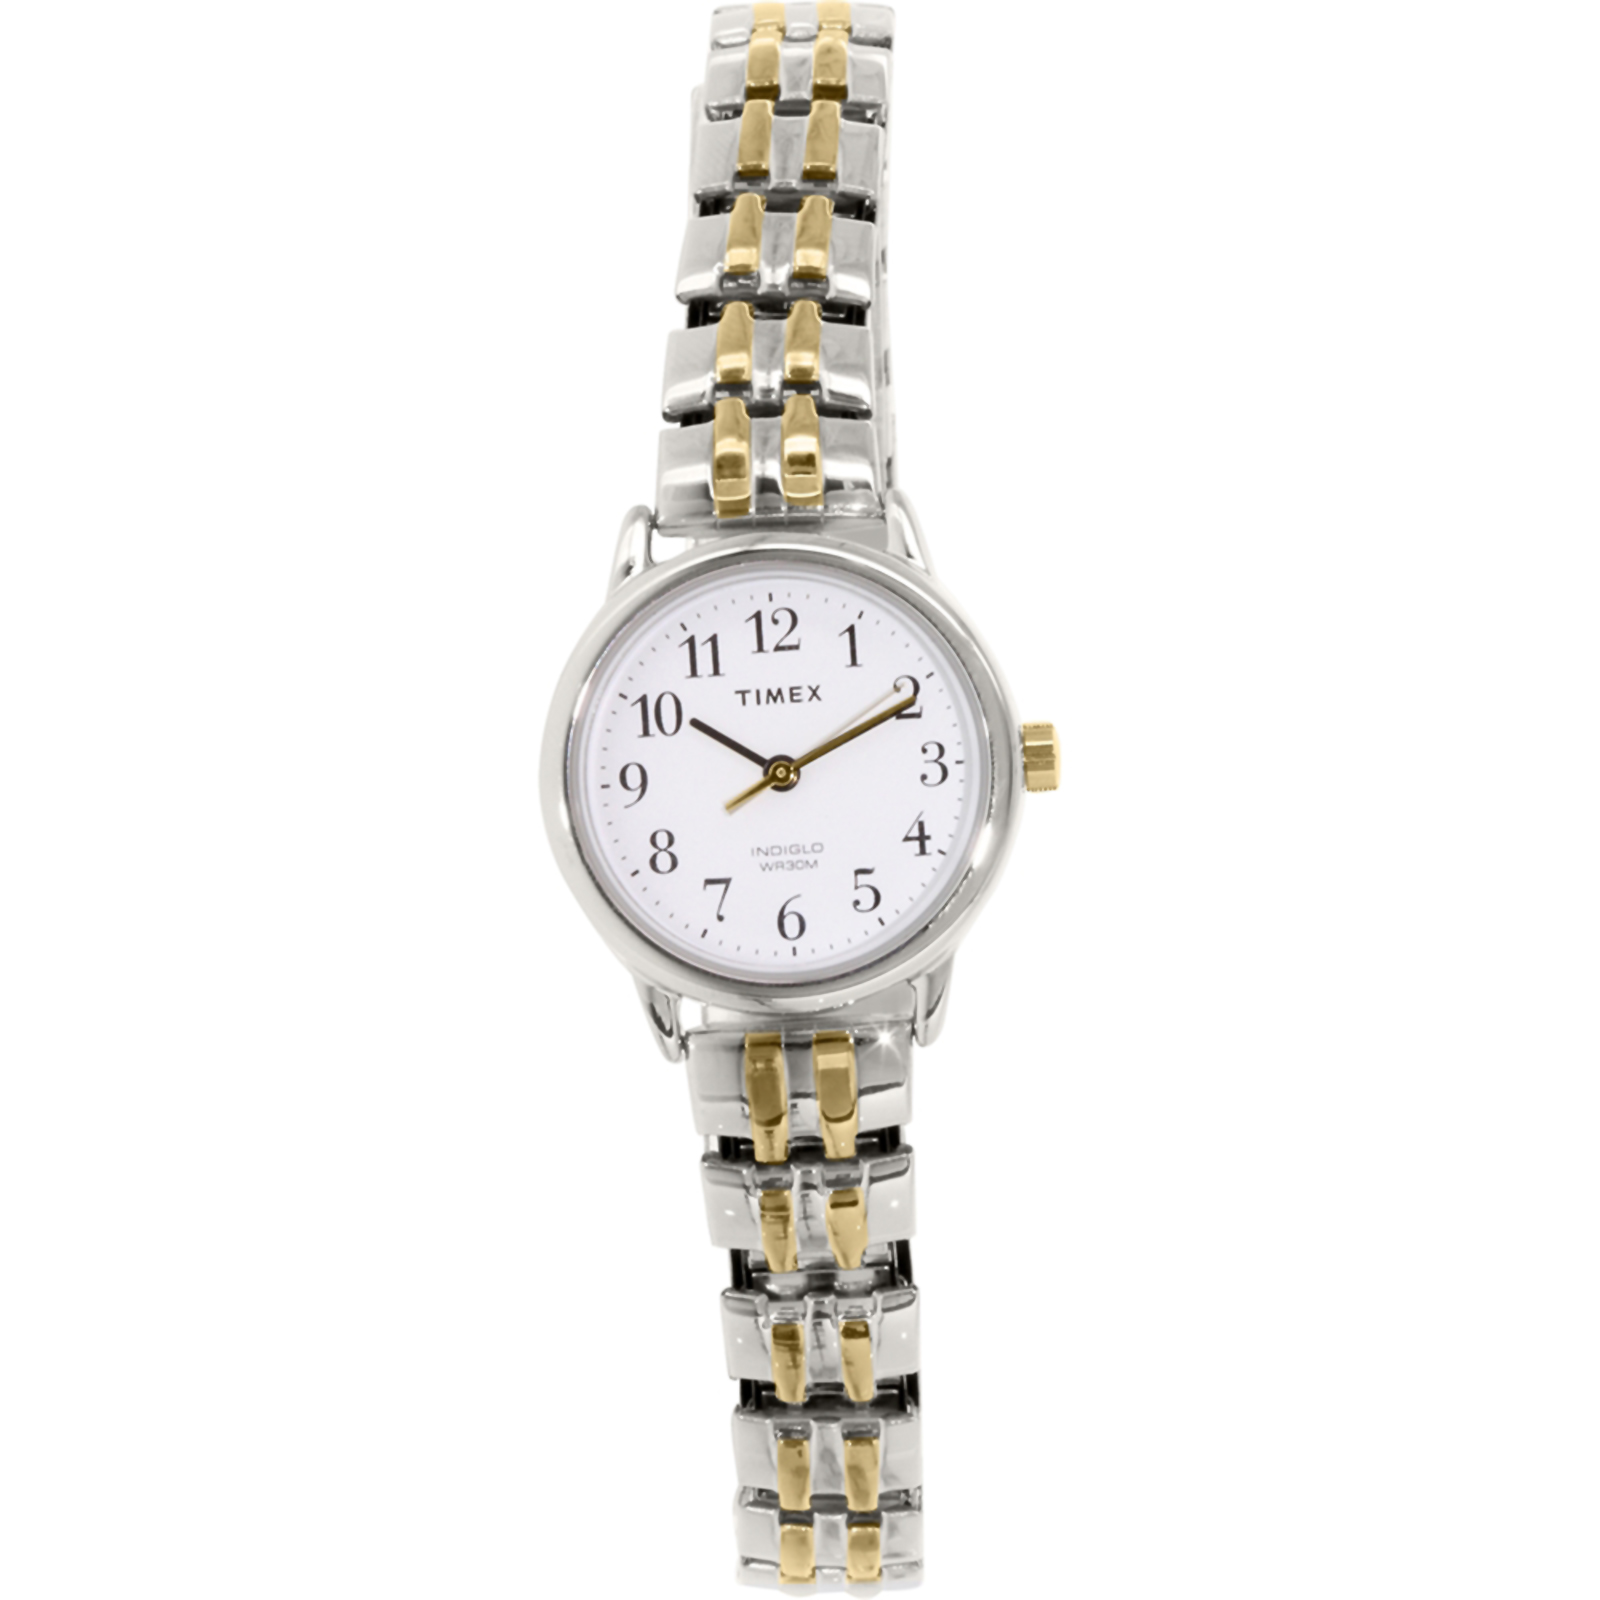 Timex T2P298 Women’s Easy Reader Stainless Steel Watch - Silver